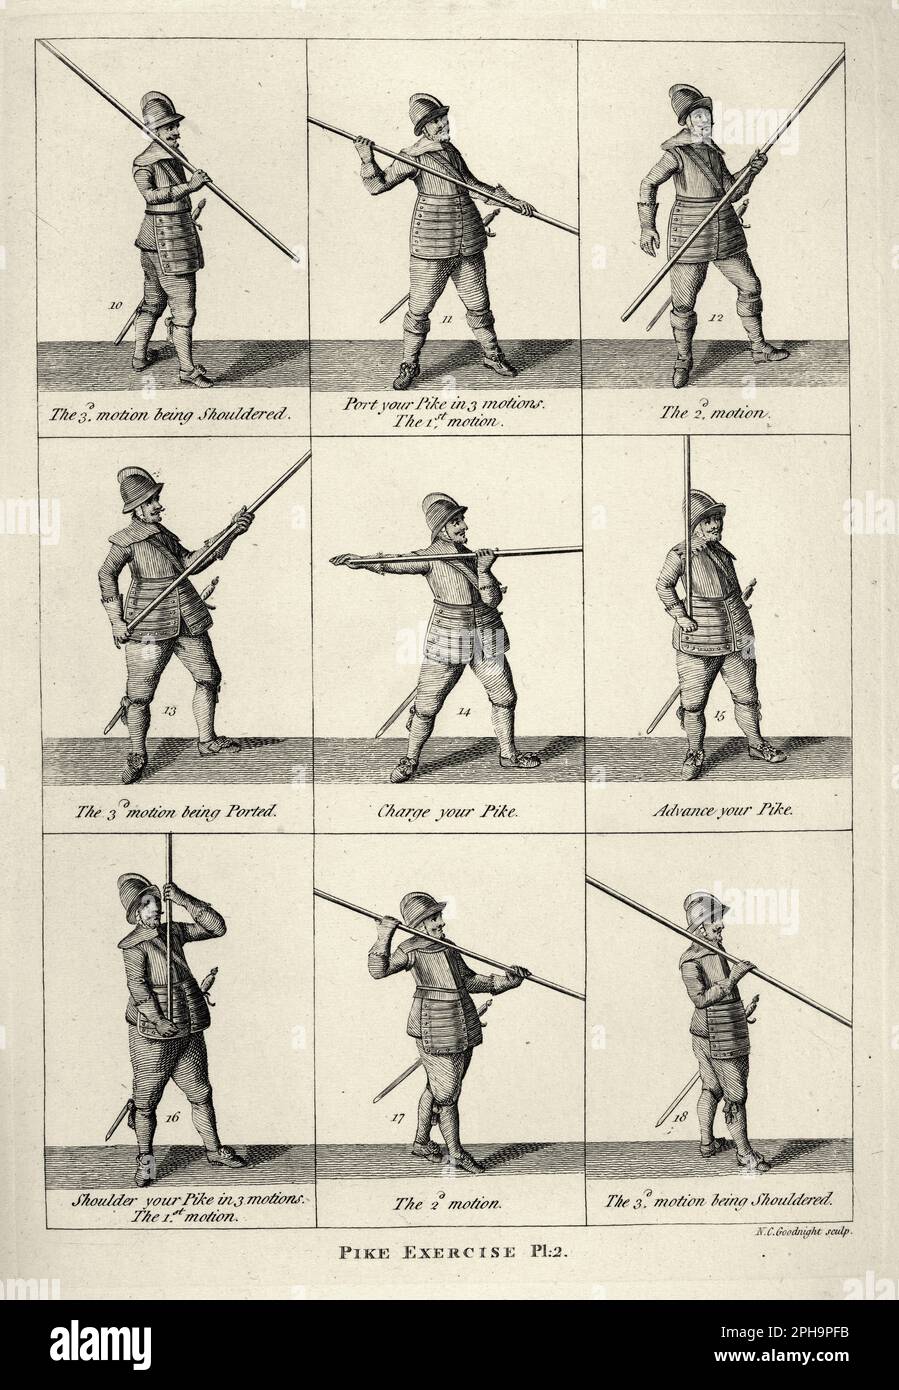 Vintage illustration, English soldier, Pikeman, Exercise with the Pike, Spear, Infantry, Military History, Weapons 17th Century Stock Photo